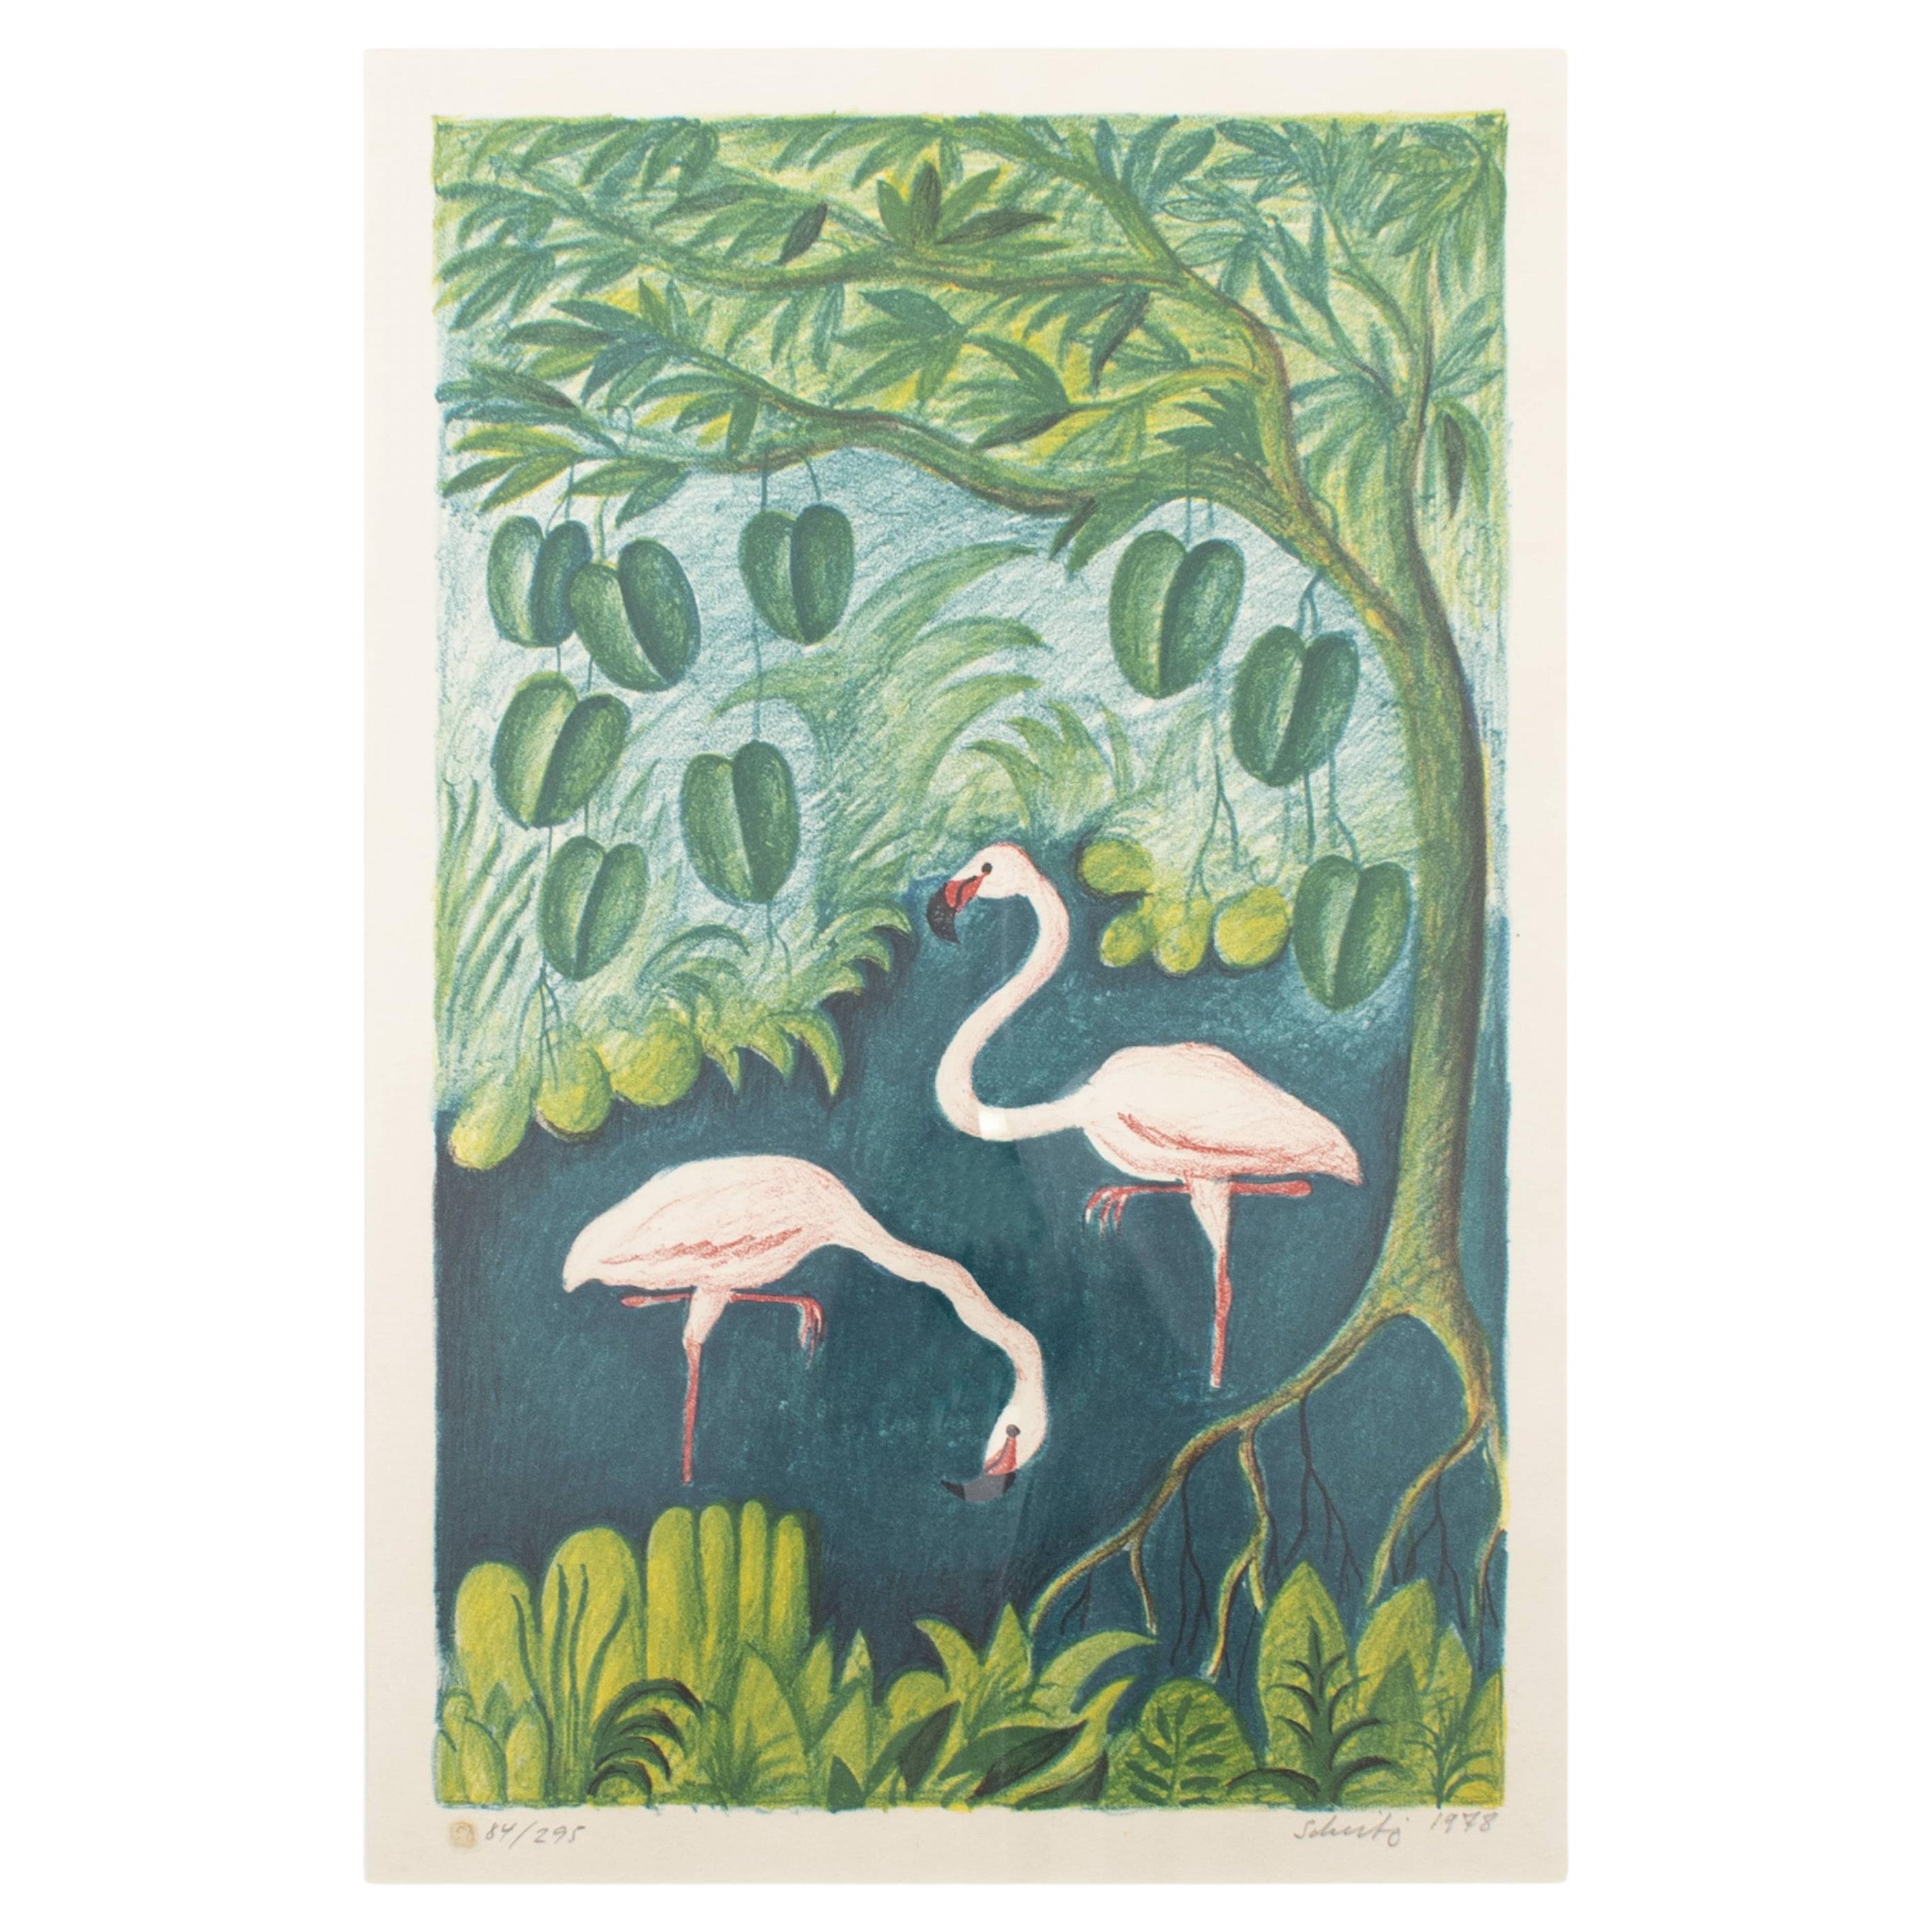 Hans Scherfig "Flamingos" Signed Lithography